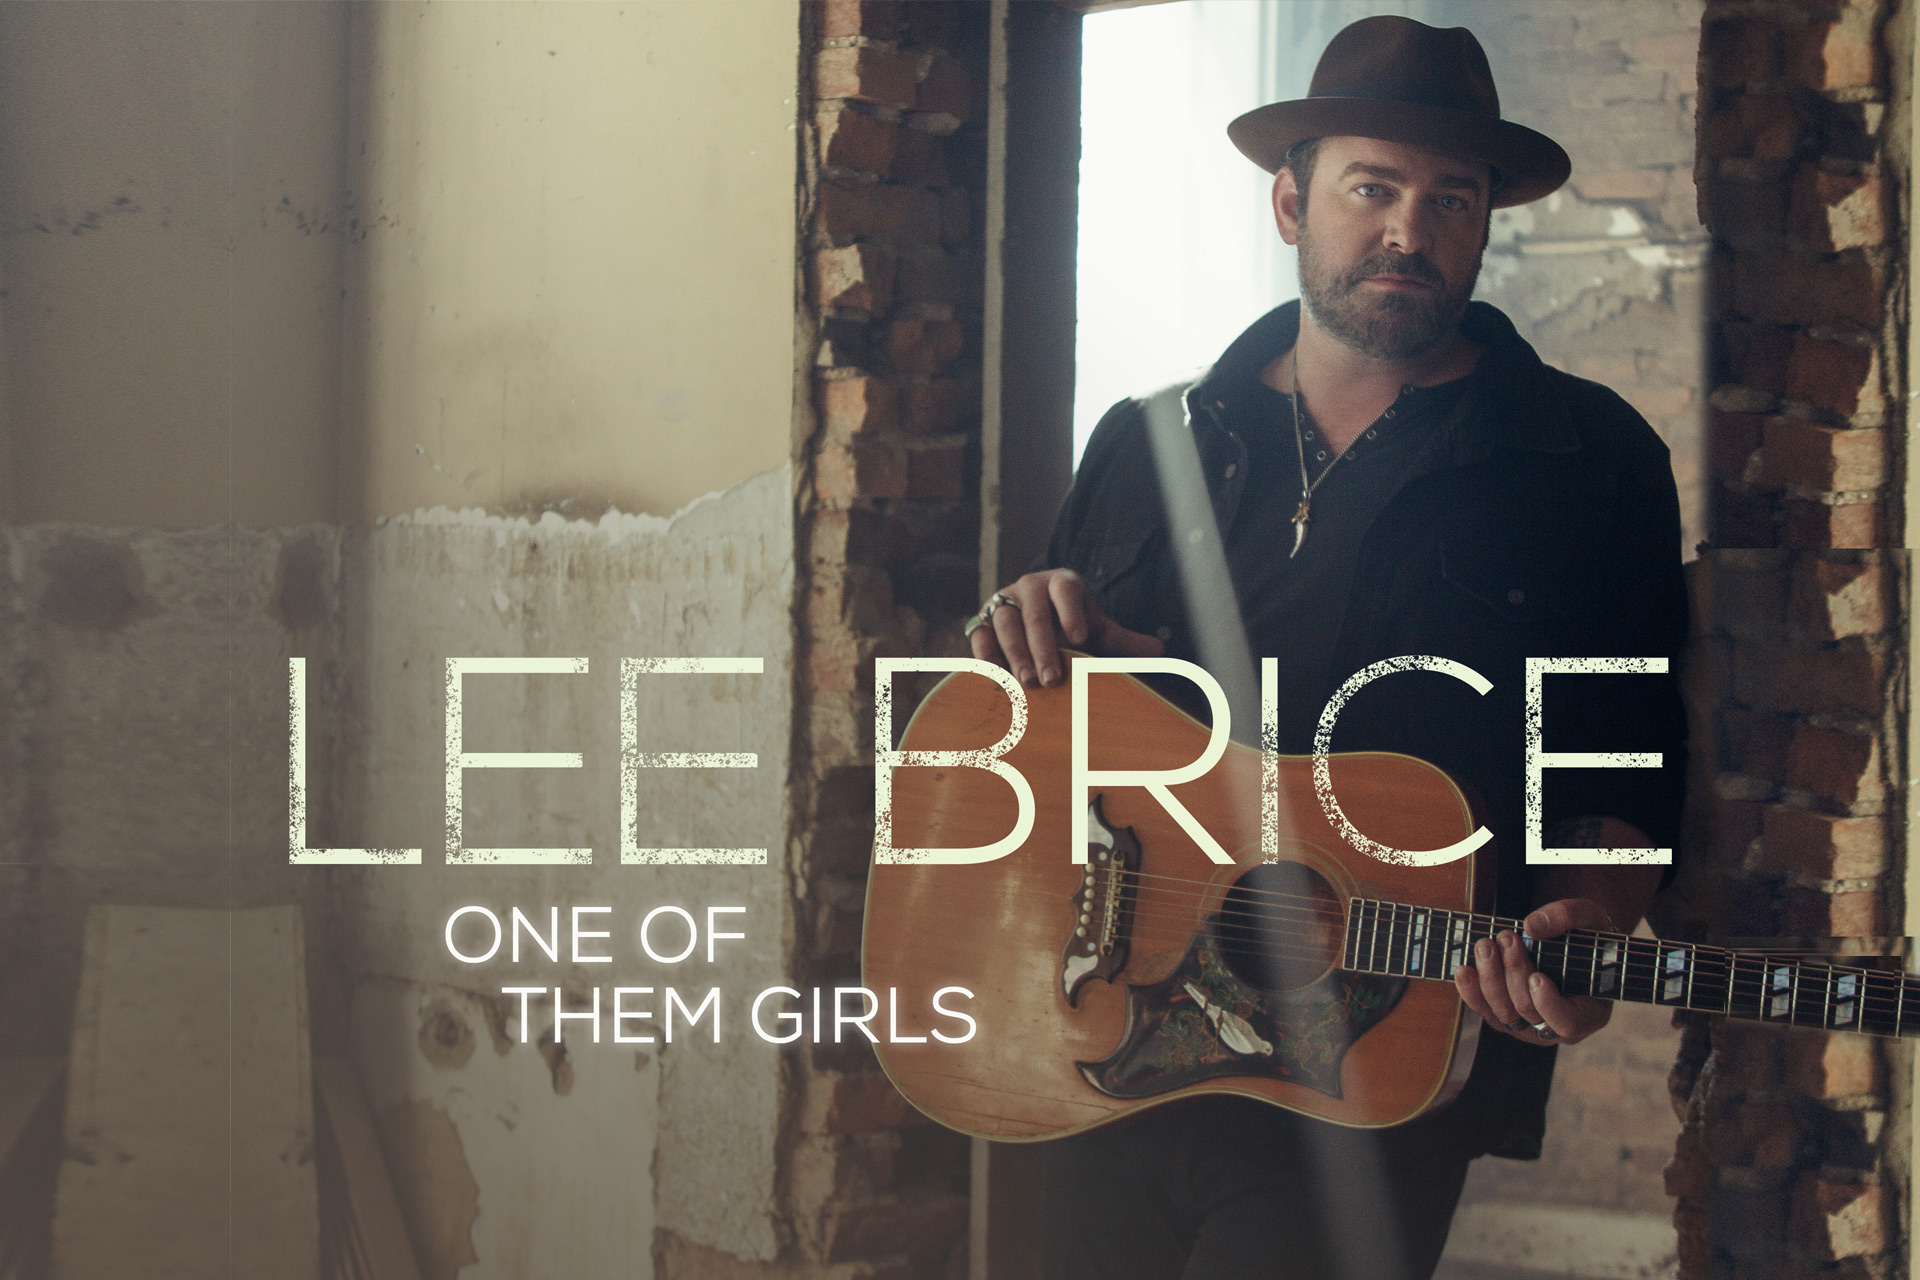 Curb Records' Lee Brice Announces Next Song & Radio Single, “One of Them  Girls” “Rumor” Nominated for “Single of the Year” at 55th Annual ACM Awards  – Curb | Word Entertainment